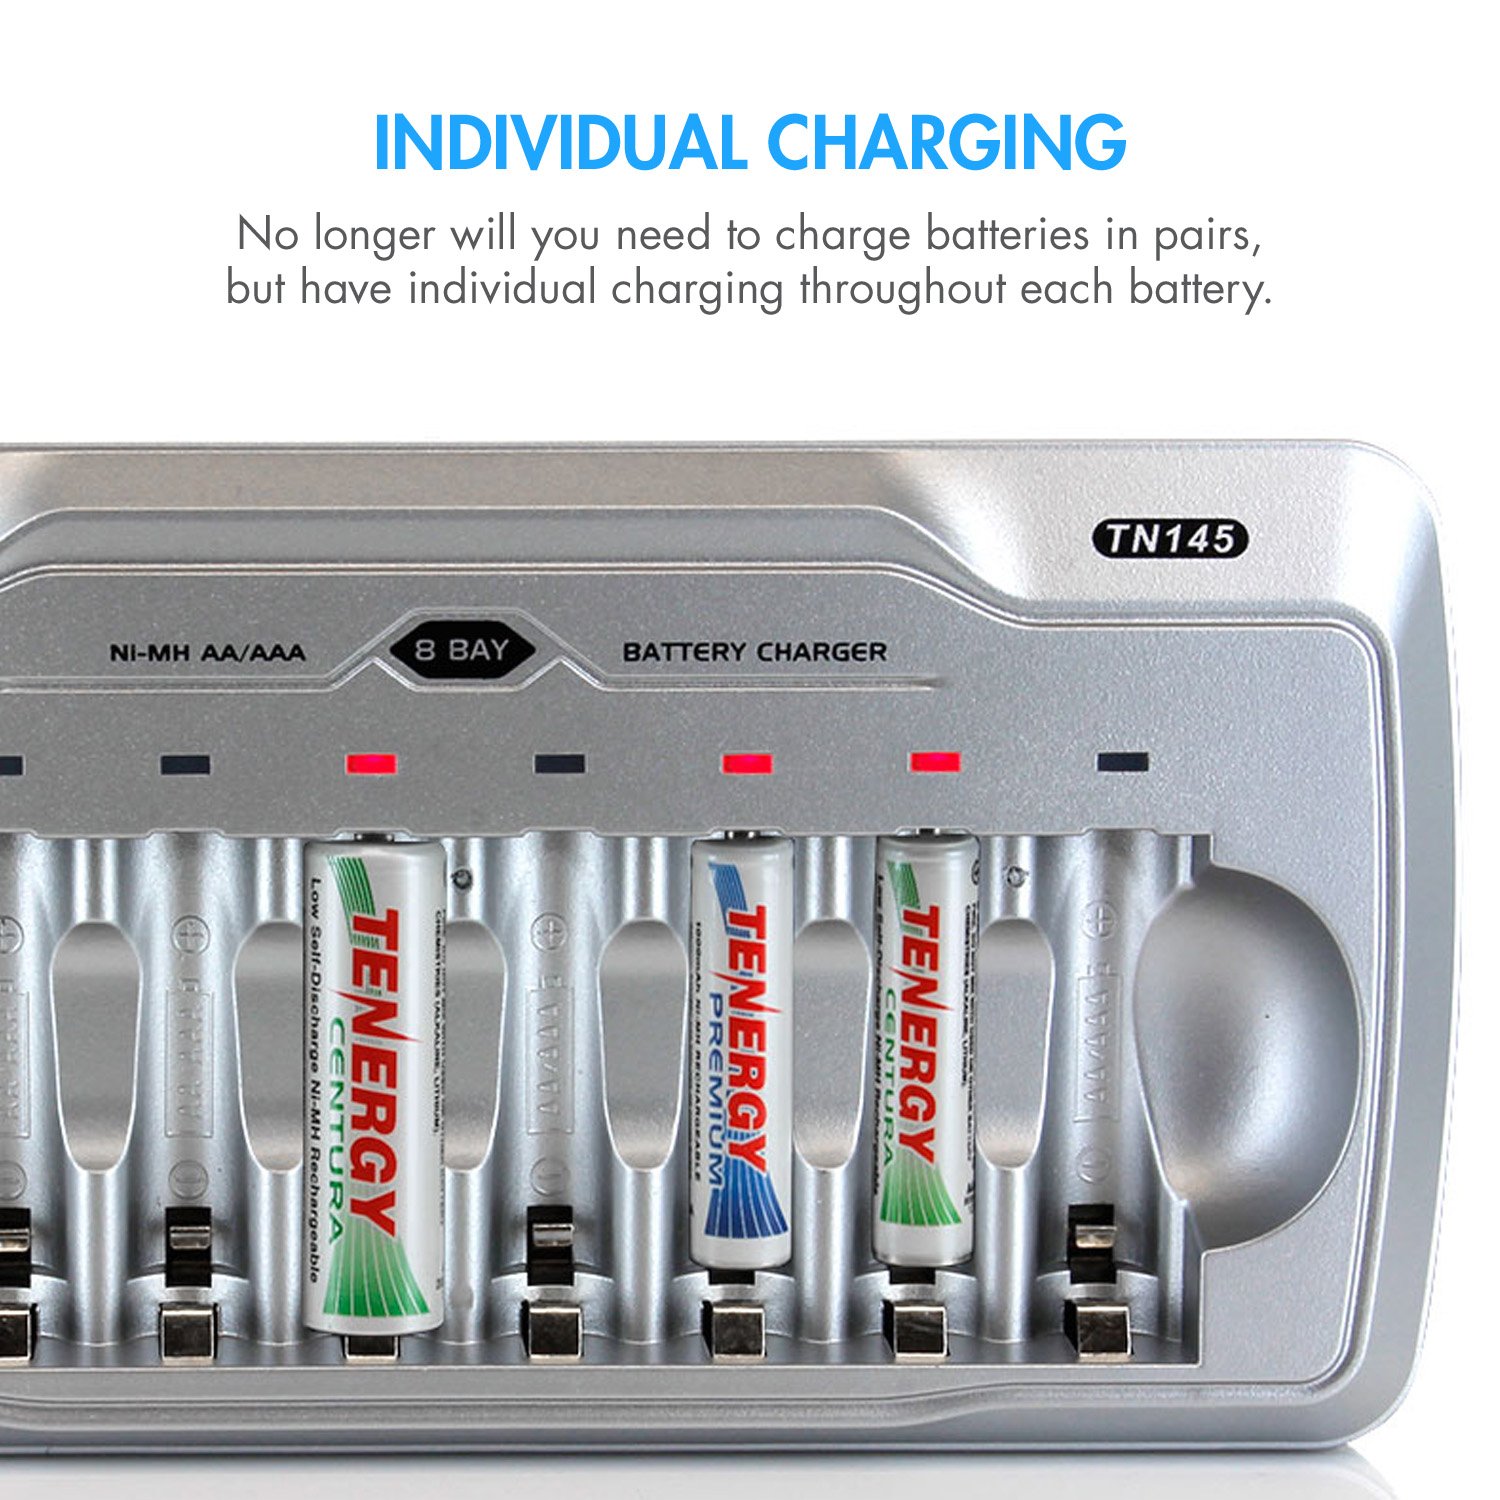 Tenergy TN145 AA AAA Battery Charger, 8-Slot Household Battery Charger, AA Cell Battery Charger with Individual Bays and LED Indicators, for NiMH/NiCd Rechargeable Batteries